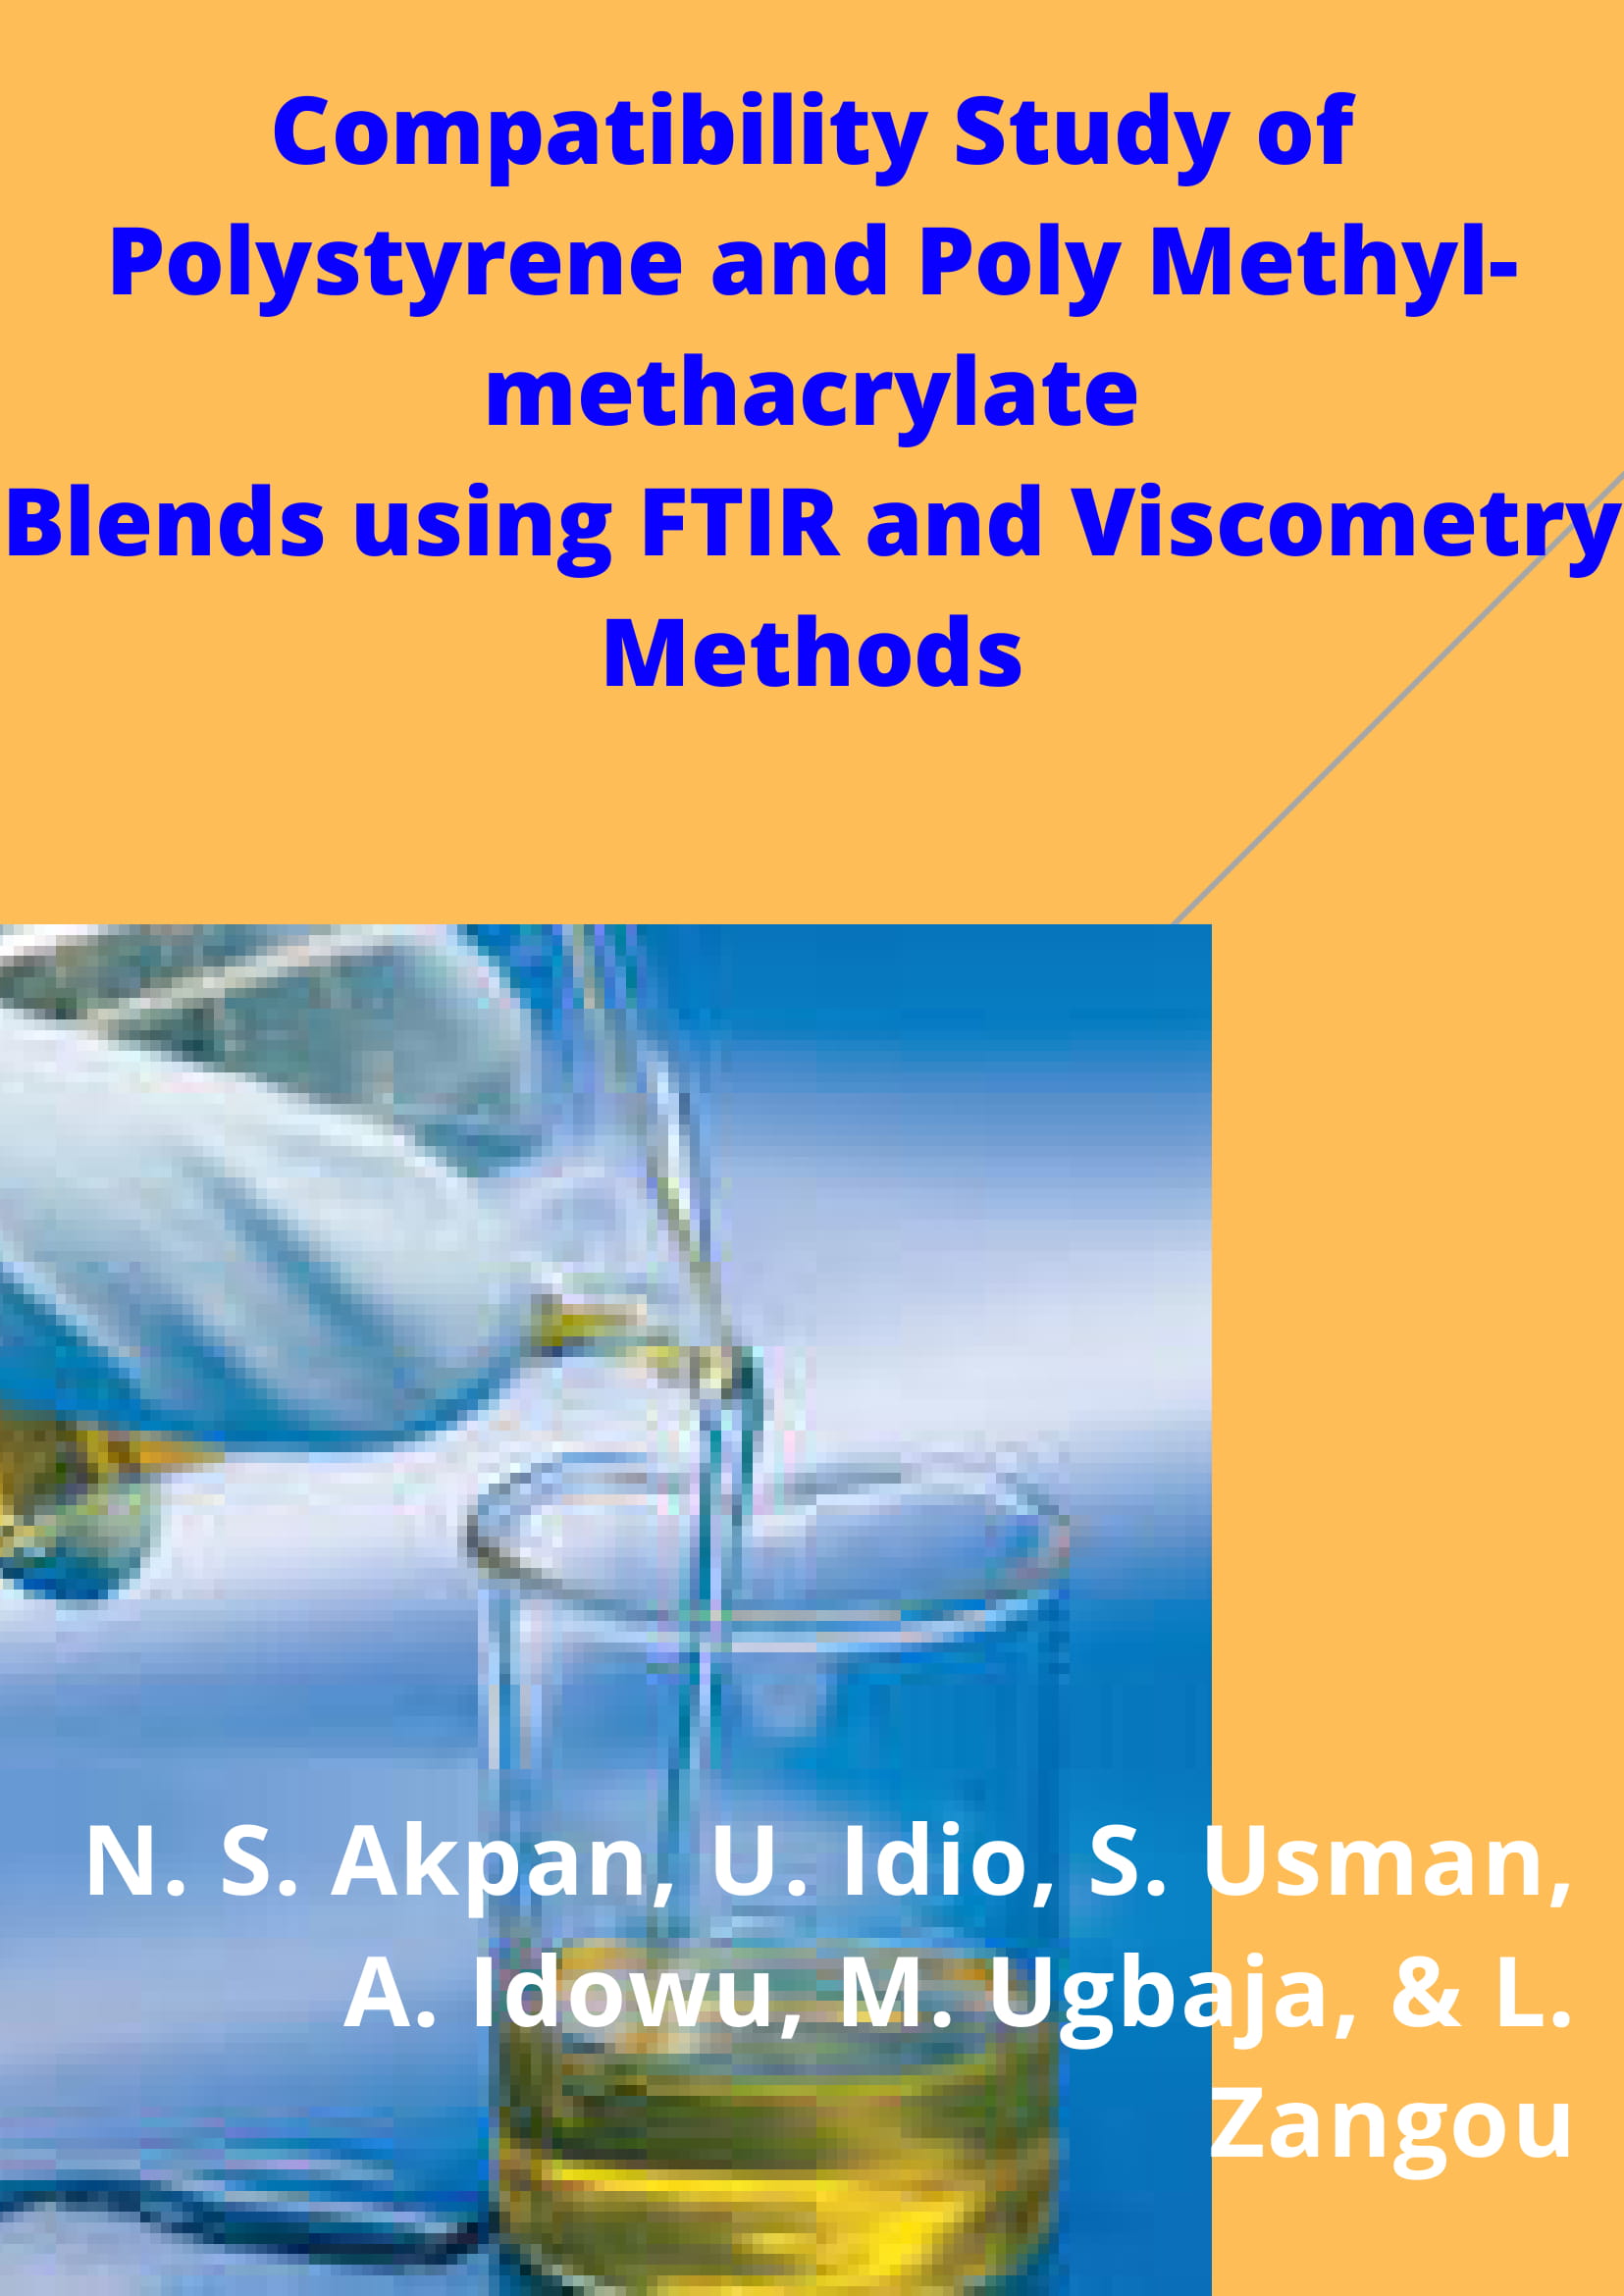 Compatibility Study of Polystyrene and Poly Methyl-methacrylate Blends using FTIR and Viscometry Methods Image